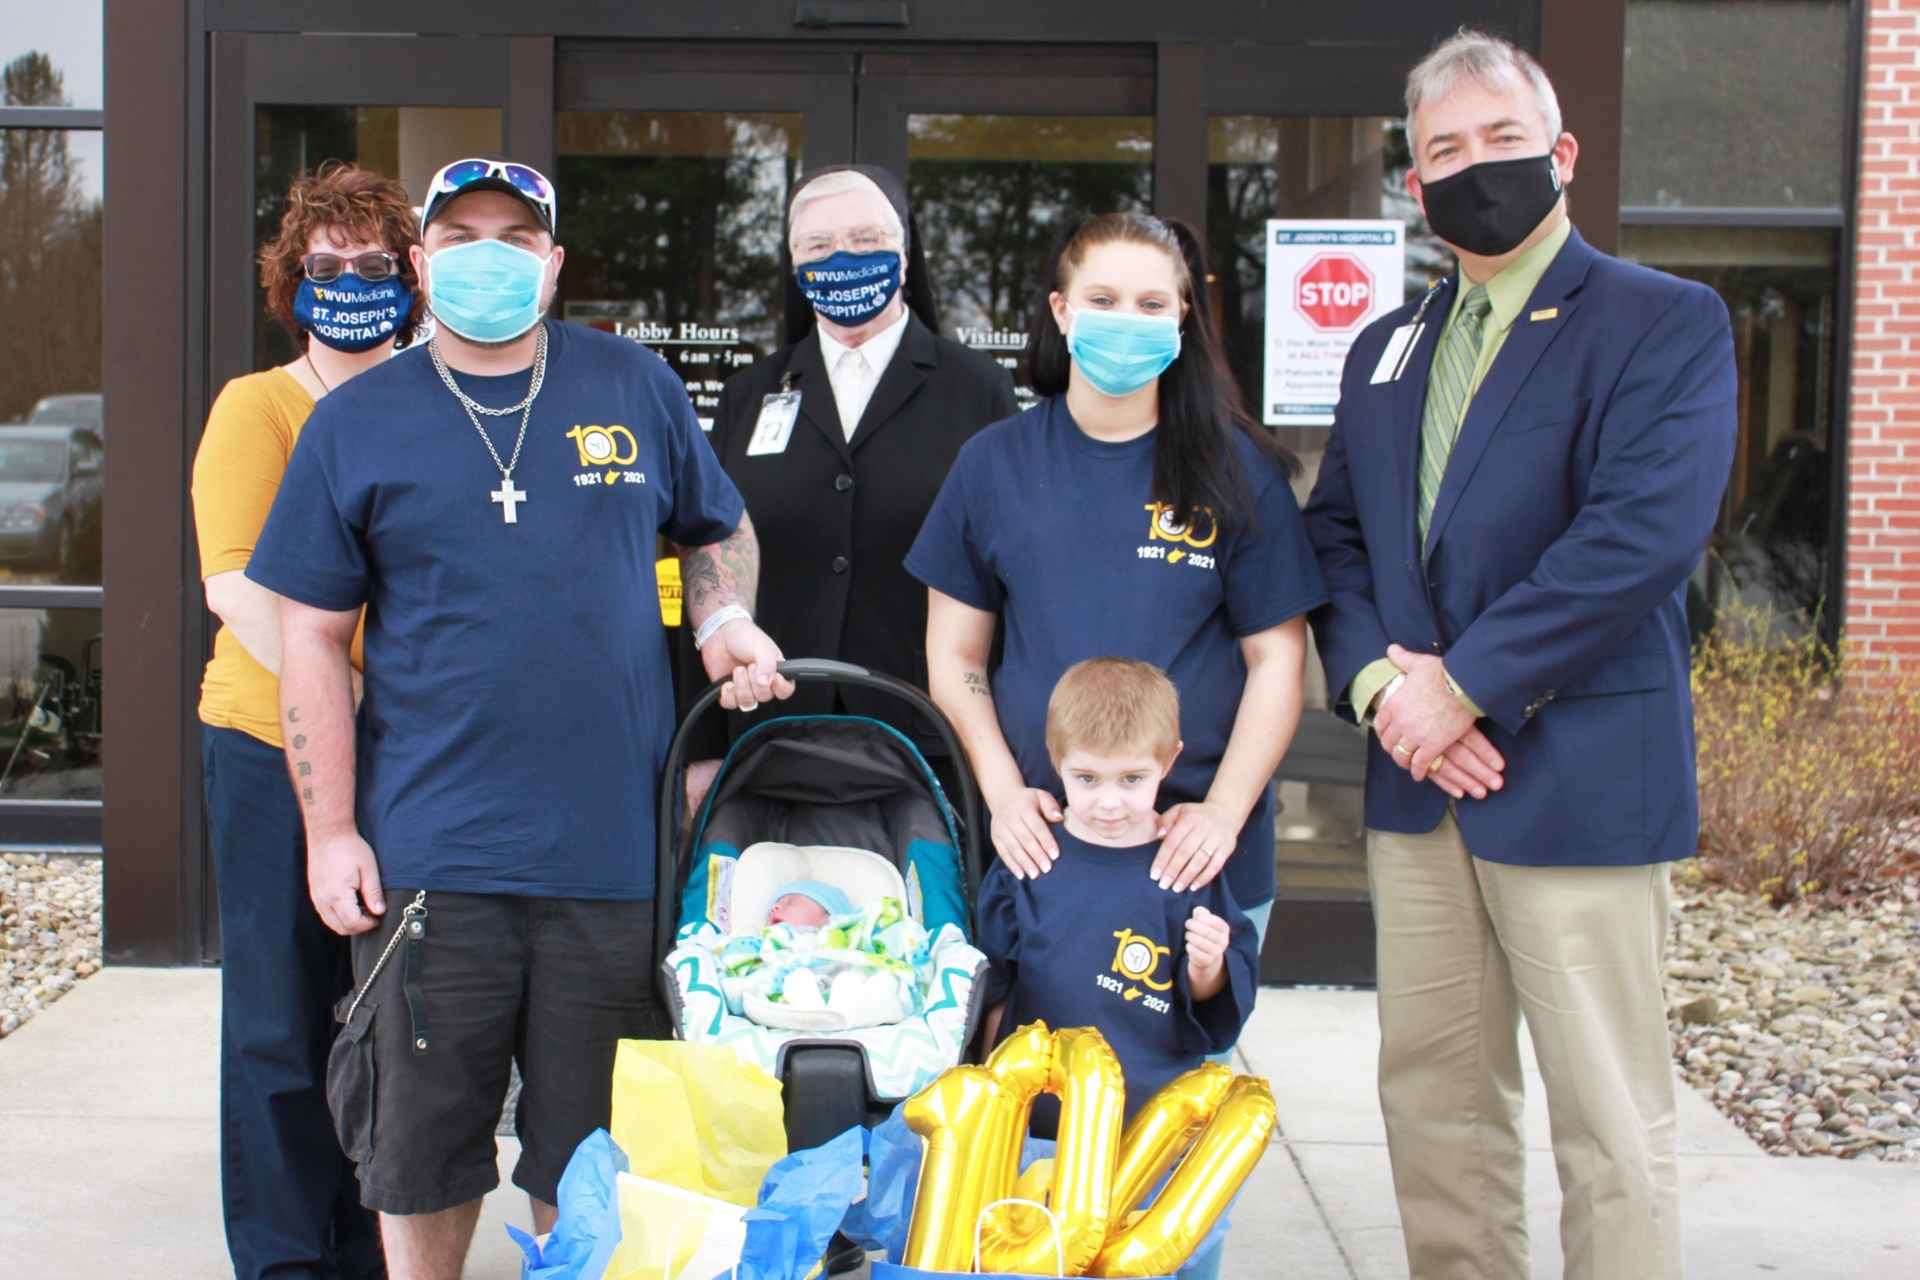 Left to right: Kathy White, Medical Staff Coordinator; Cody Merriman; Sister Francesca Lowis, Vice President of Mission Integration; Kristan Green; Skip Gjolberg, President; and new baby and son.